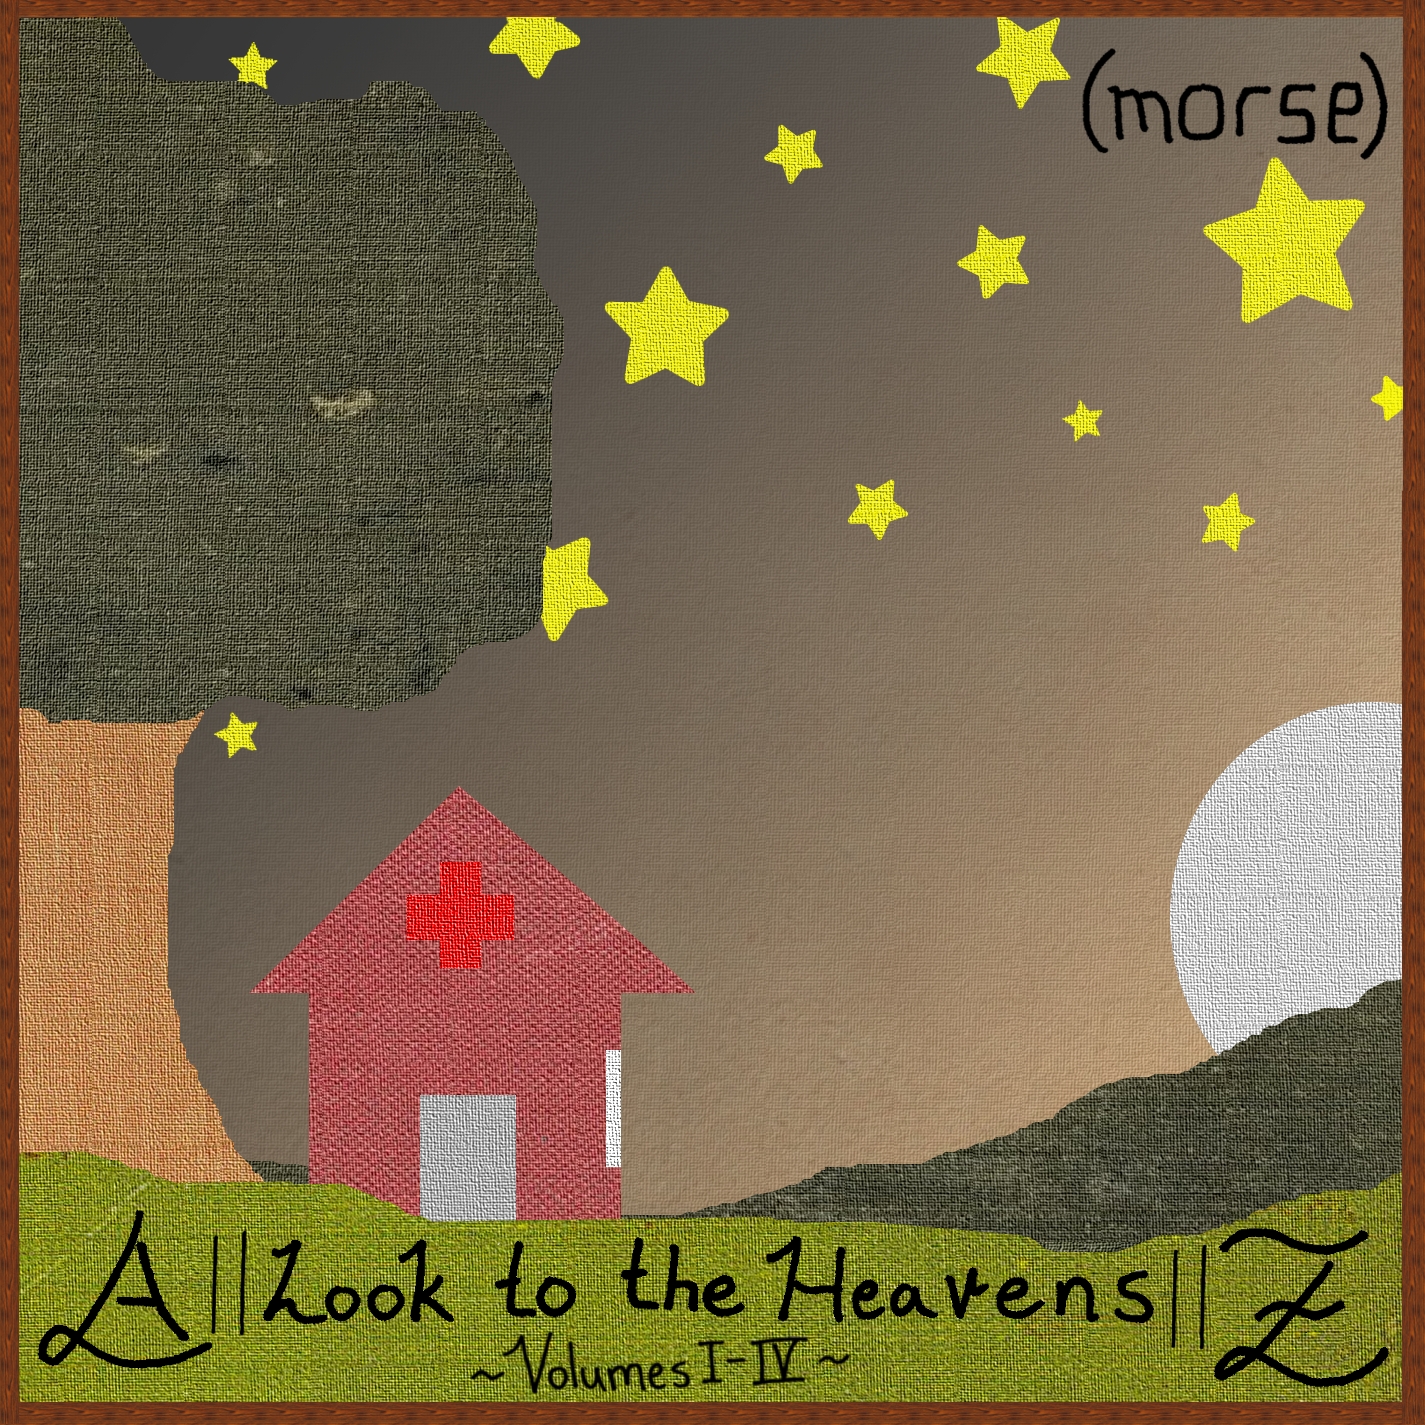 (morse) - A|| Look to the Heavens ||Z